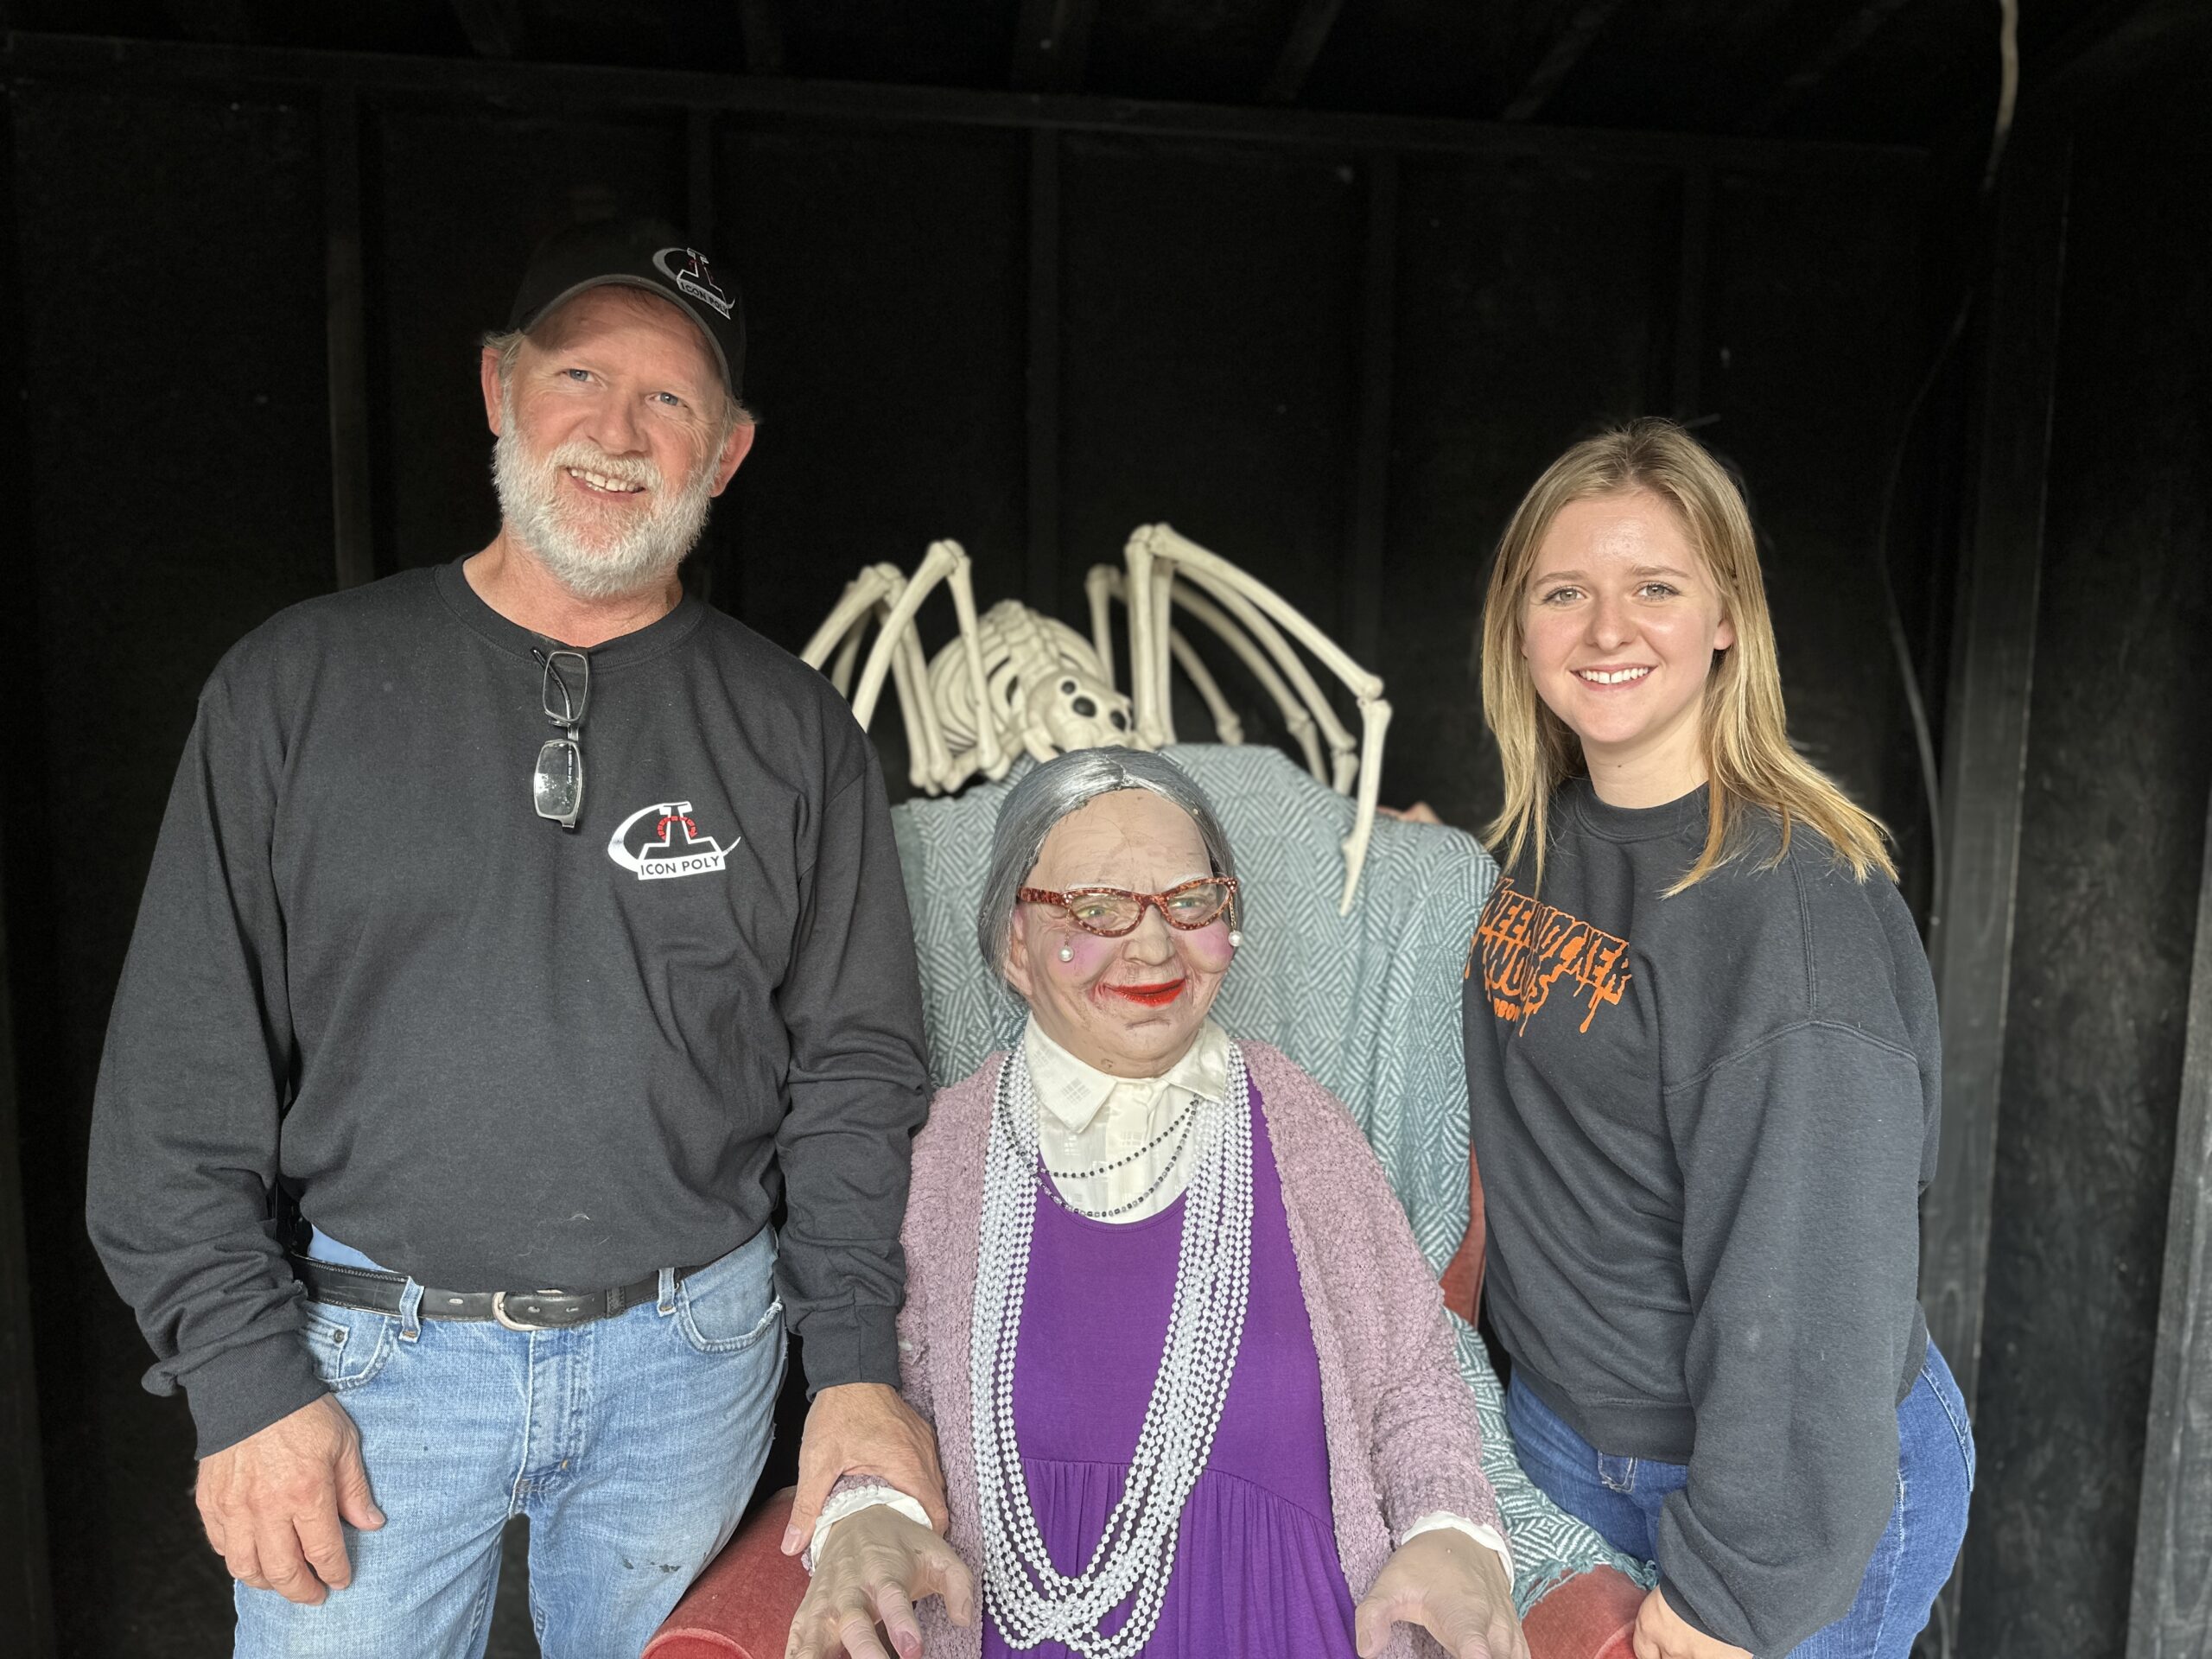 KneeKnocker Woods owners and father-daughter duo Kyle Vohland and Kylee Olson stand by Grandma Grimm, an animatronic character.